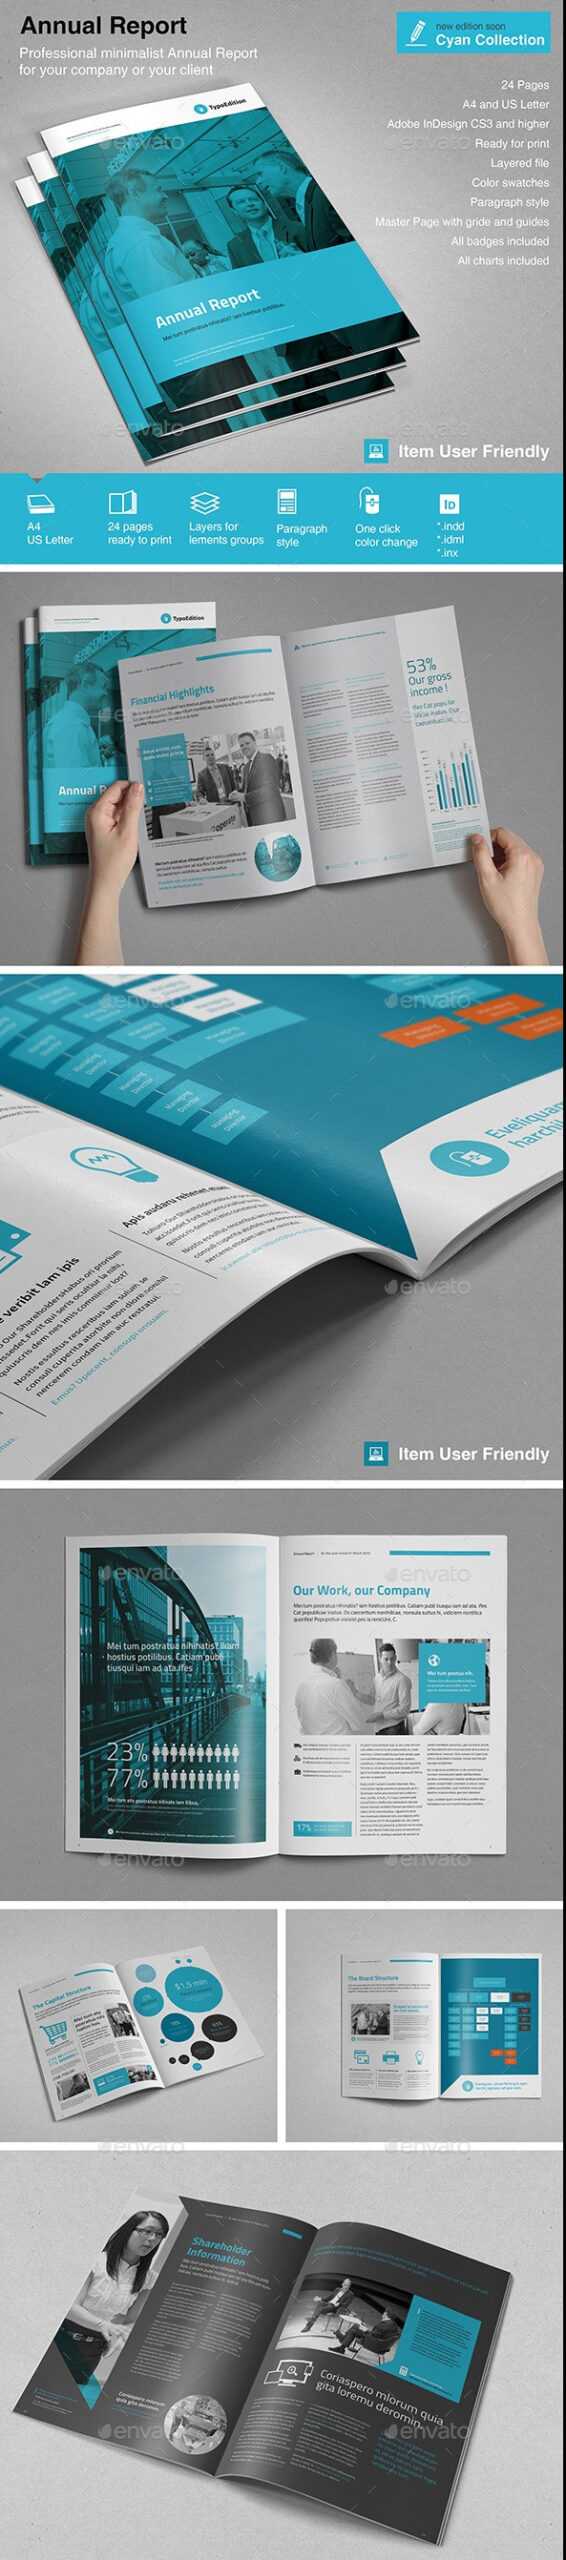 32+ Indesign Annual Report Templates For Corporate Intended For Free Annual Report Template Indesign